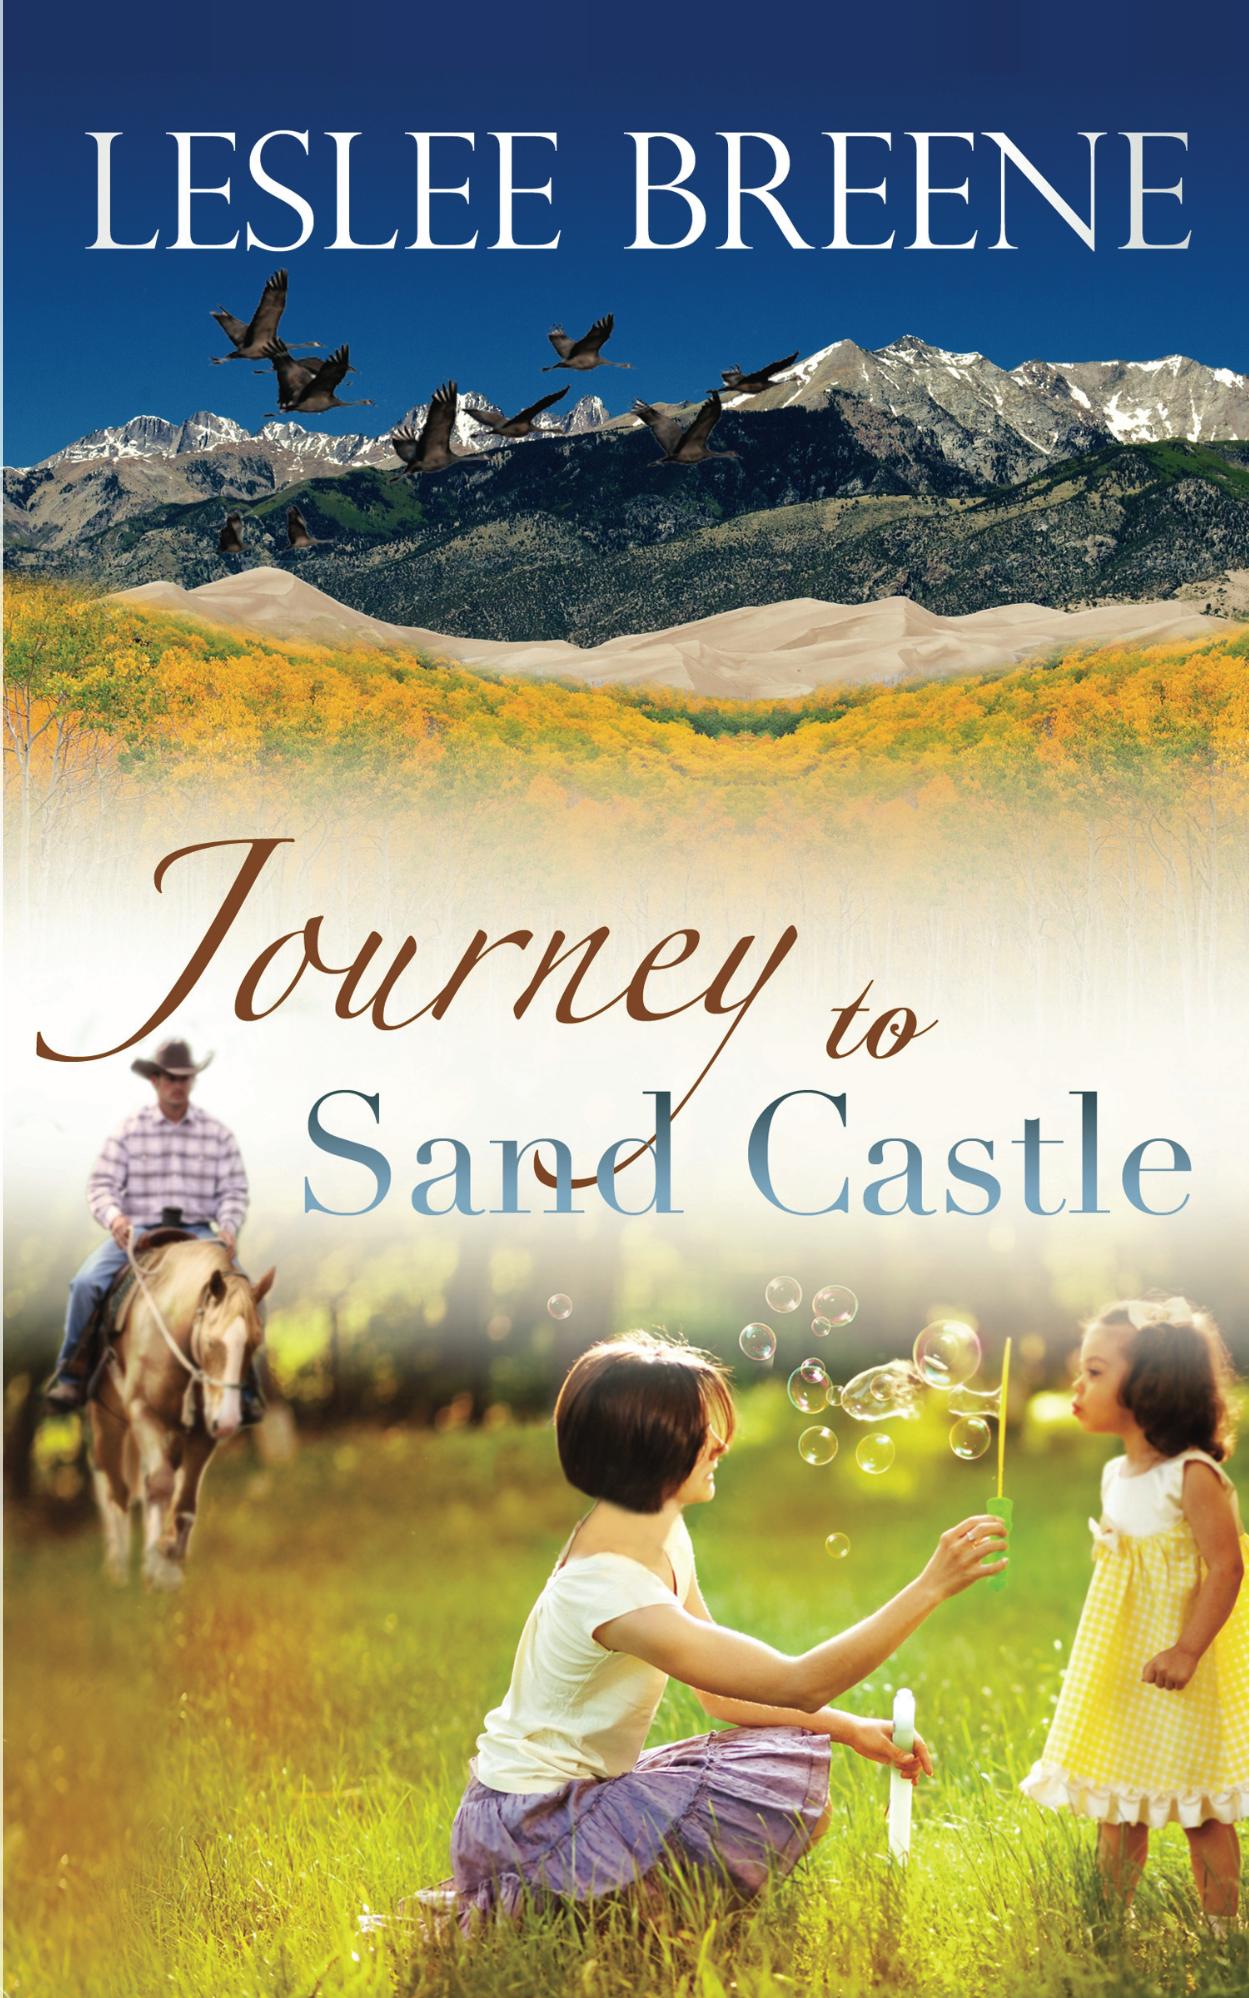 After Hurricane Katrina, Tess, a divorced teacher, takes an orphaned, bi-racial girl to Colorado to meet her estranged grandfather. Tess never plans on falling in love again--then she meets Grant, a widowed outfitter.